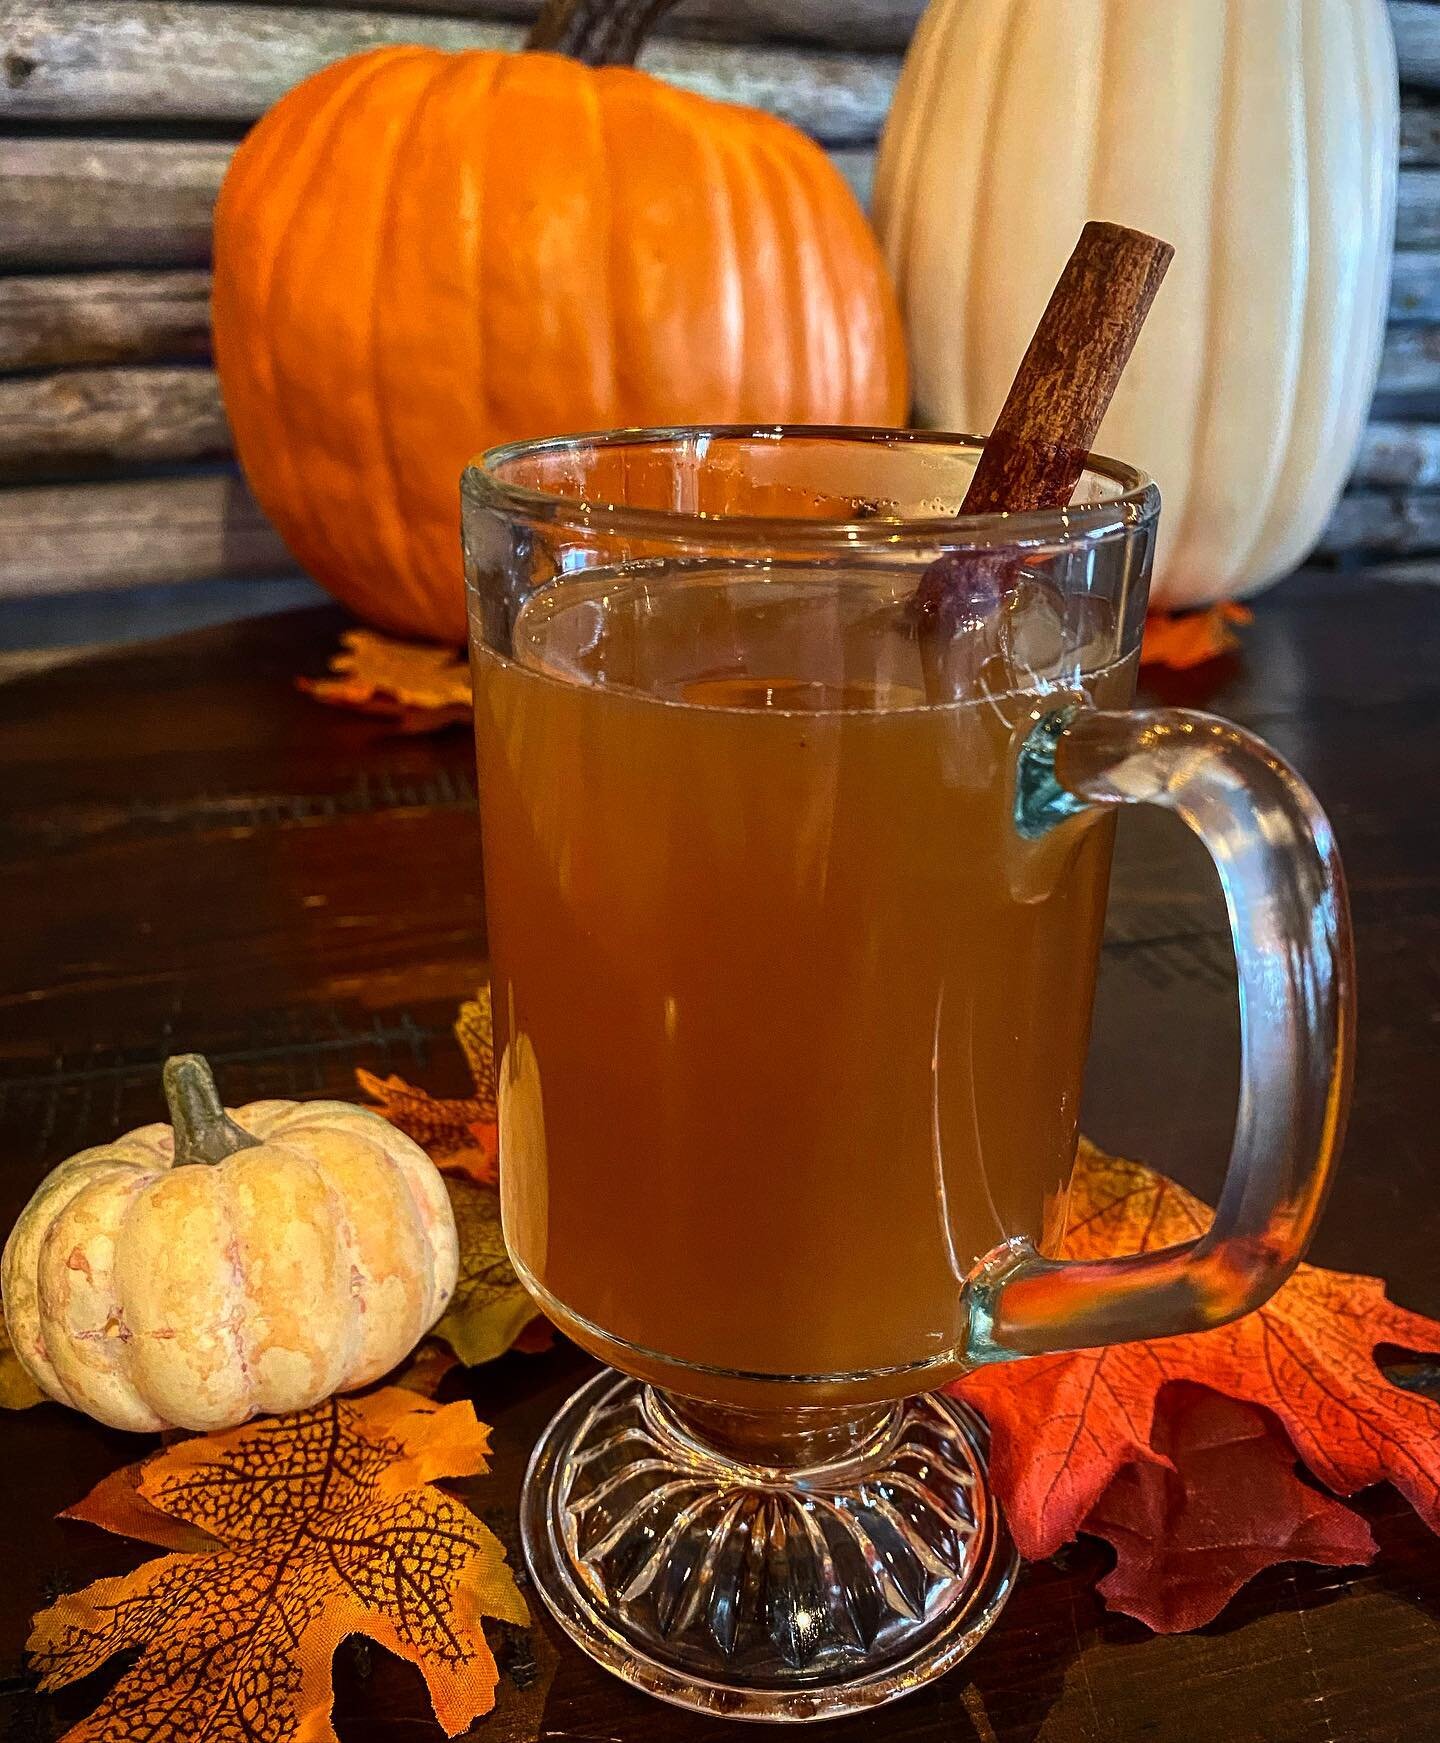 And just like that, our Hot Spiced Cider is back! Get it at the taproom all weekend, 12-6 PM.

#hotspicedcider #ciderseason #drinkapples #drinklocal #rootwoodcider #happyfall #autumnvibes